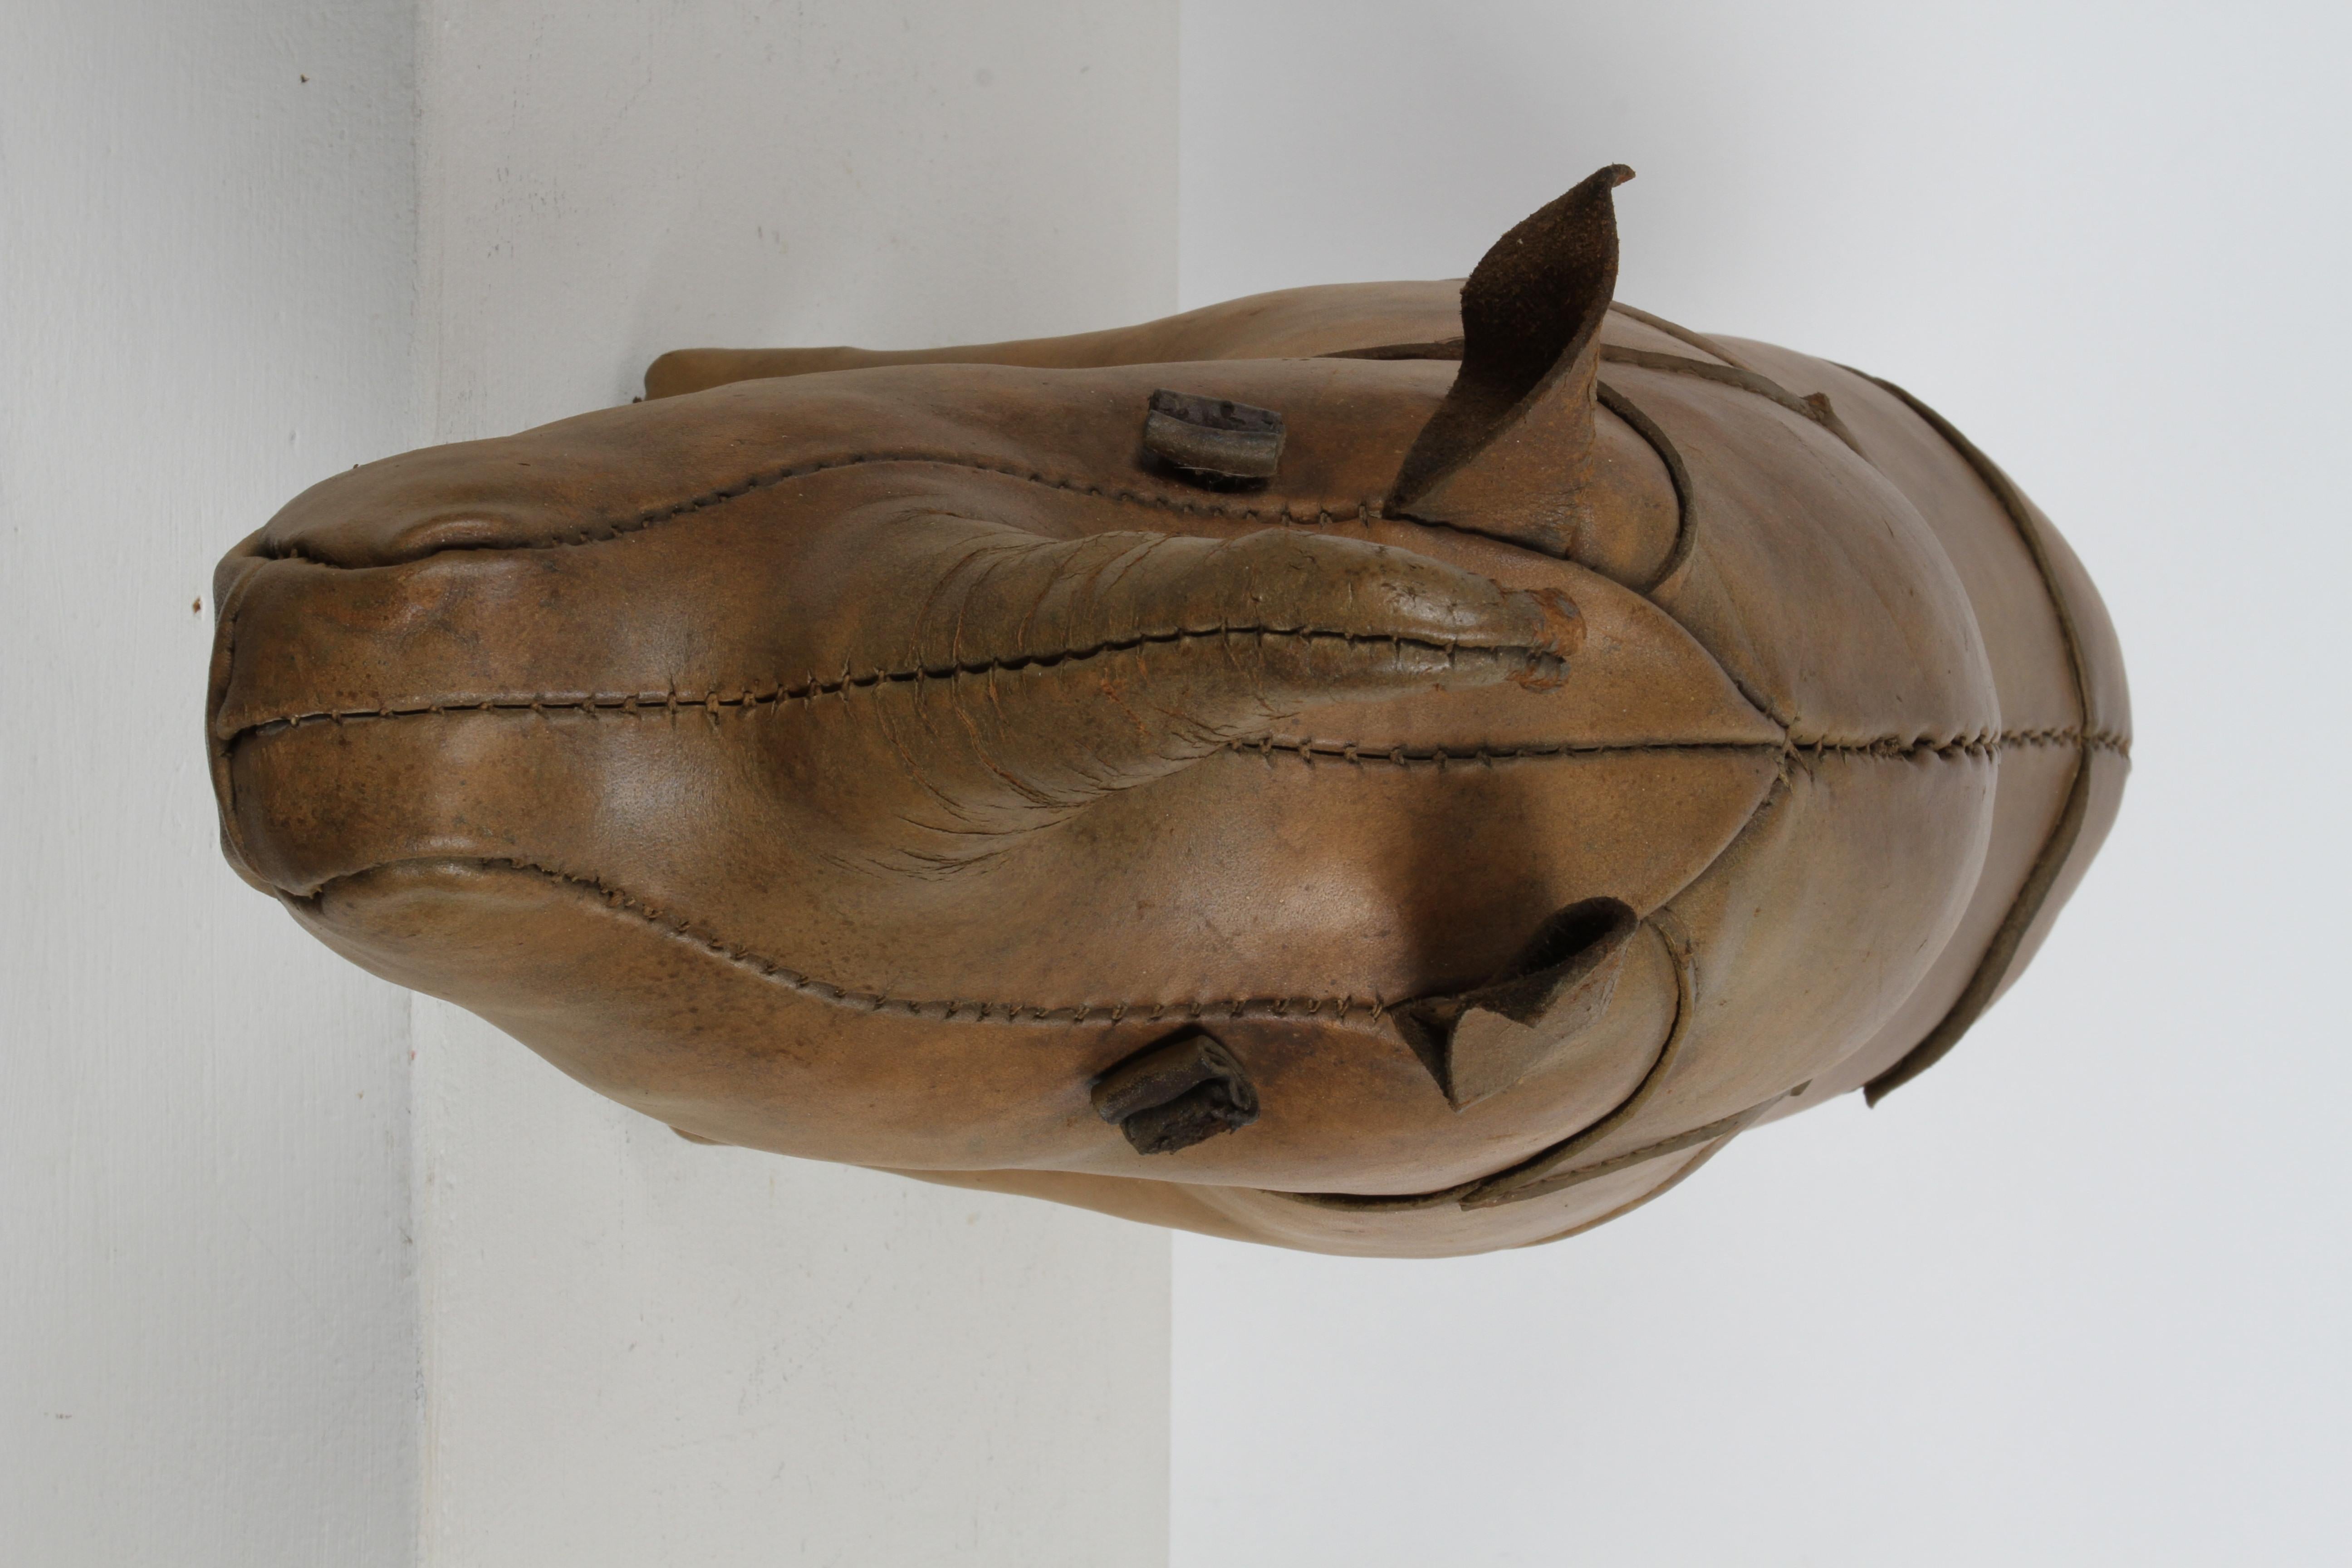 1960s Dimitri Omersa Leather Rhino Retailed by Abercrombie & Fitch - Restored In Good Condition For Sale In St. Louis, MO